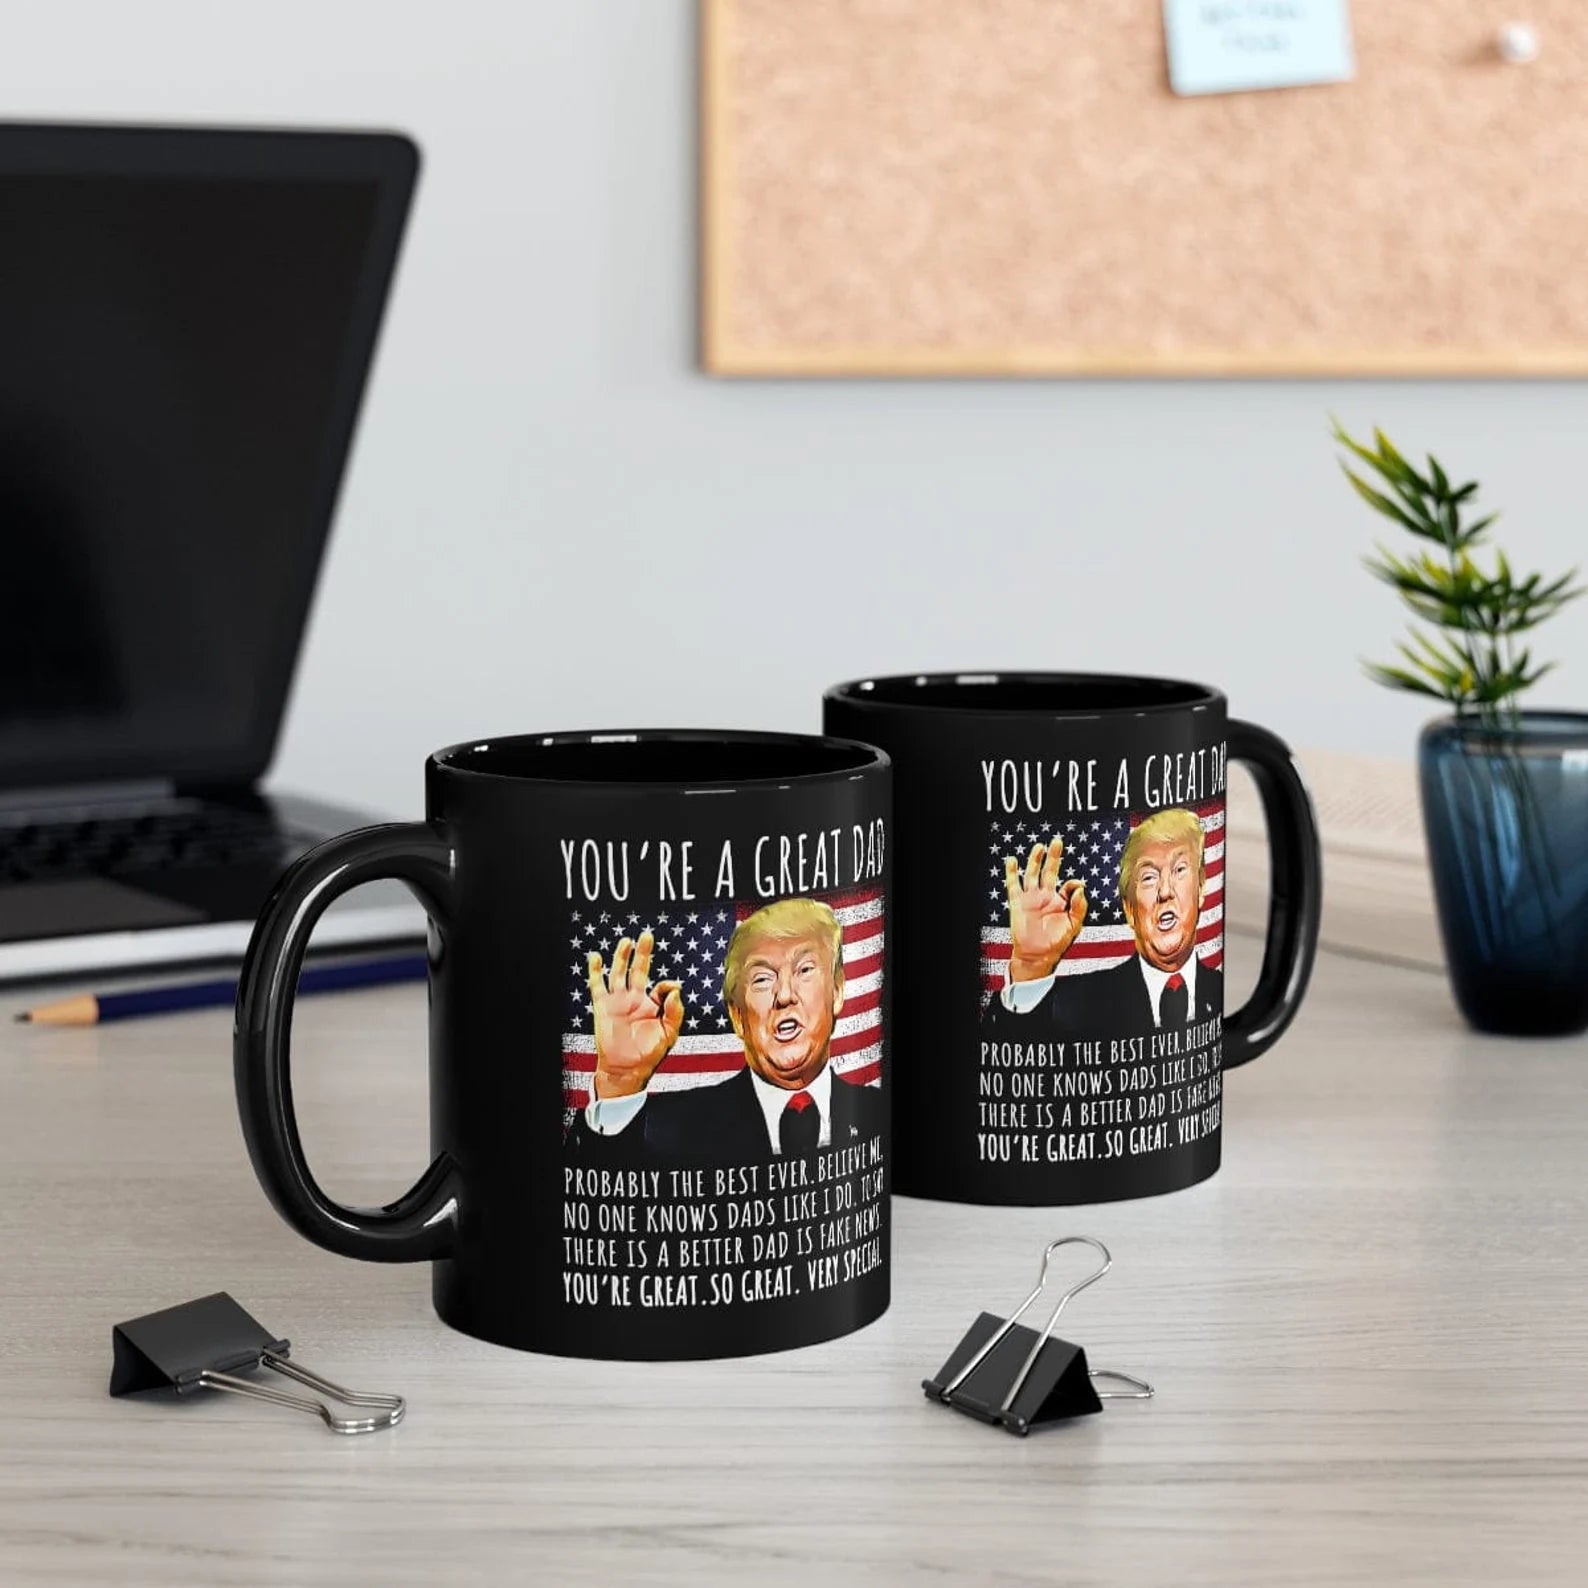 You're A Great Dad Funny Trump Speech ,Funny Fathers Day Gift for Dad - M04